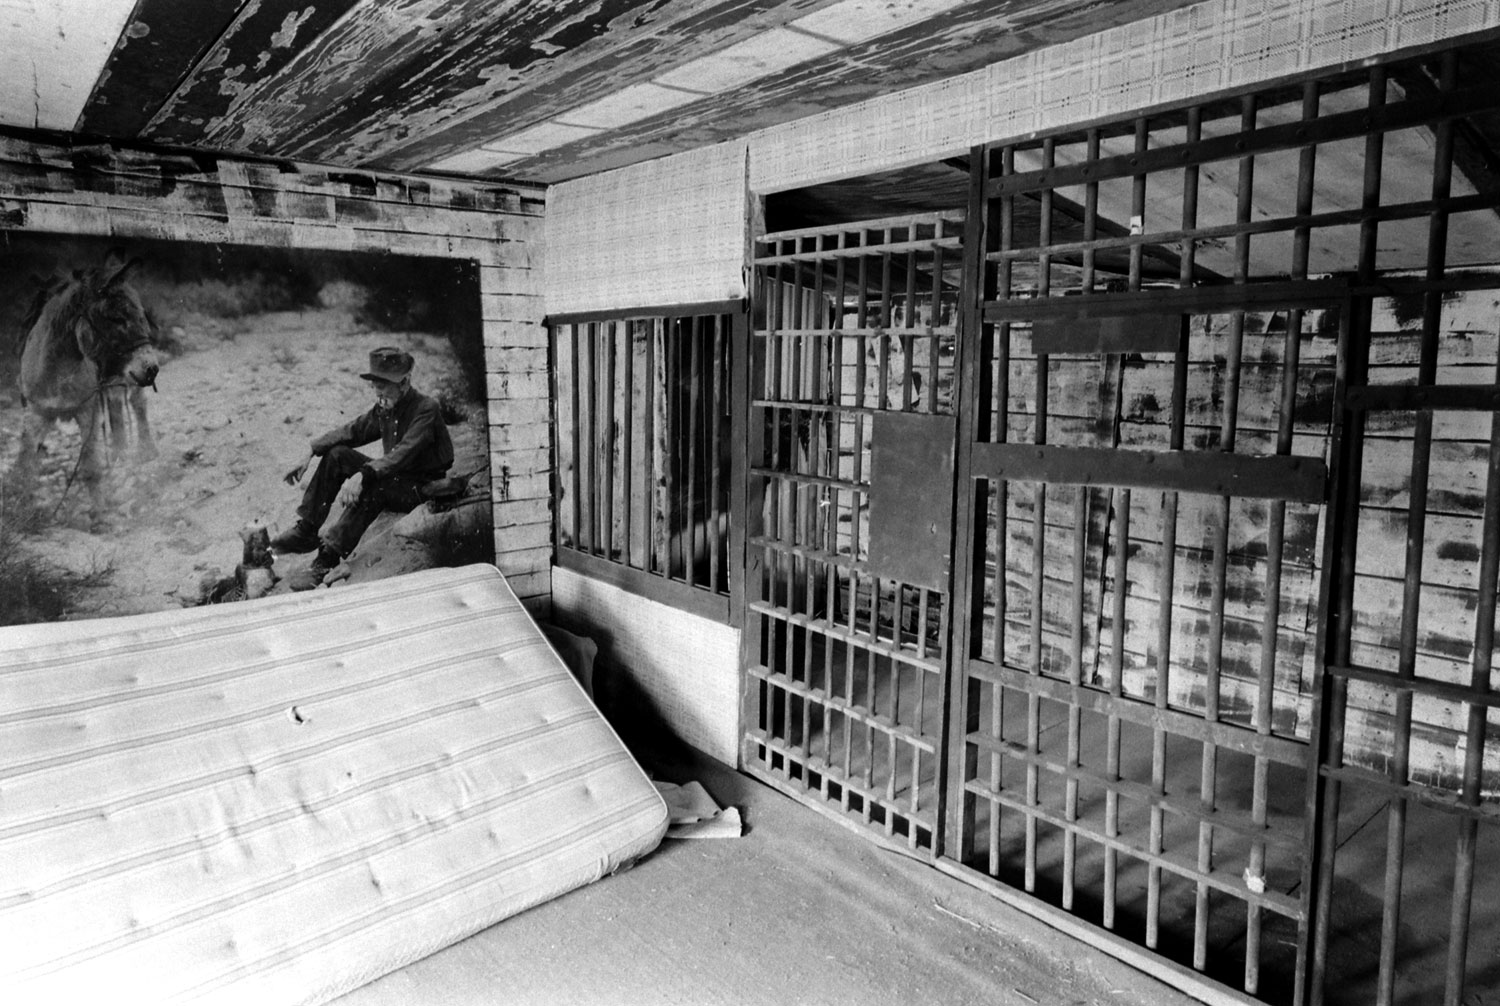 Jail cell at the Spahn Movie Ranch, home to the Manson Family in the late 1960s and occasional location for filming of Westerns.